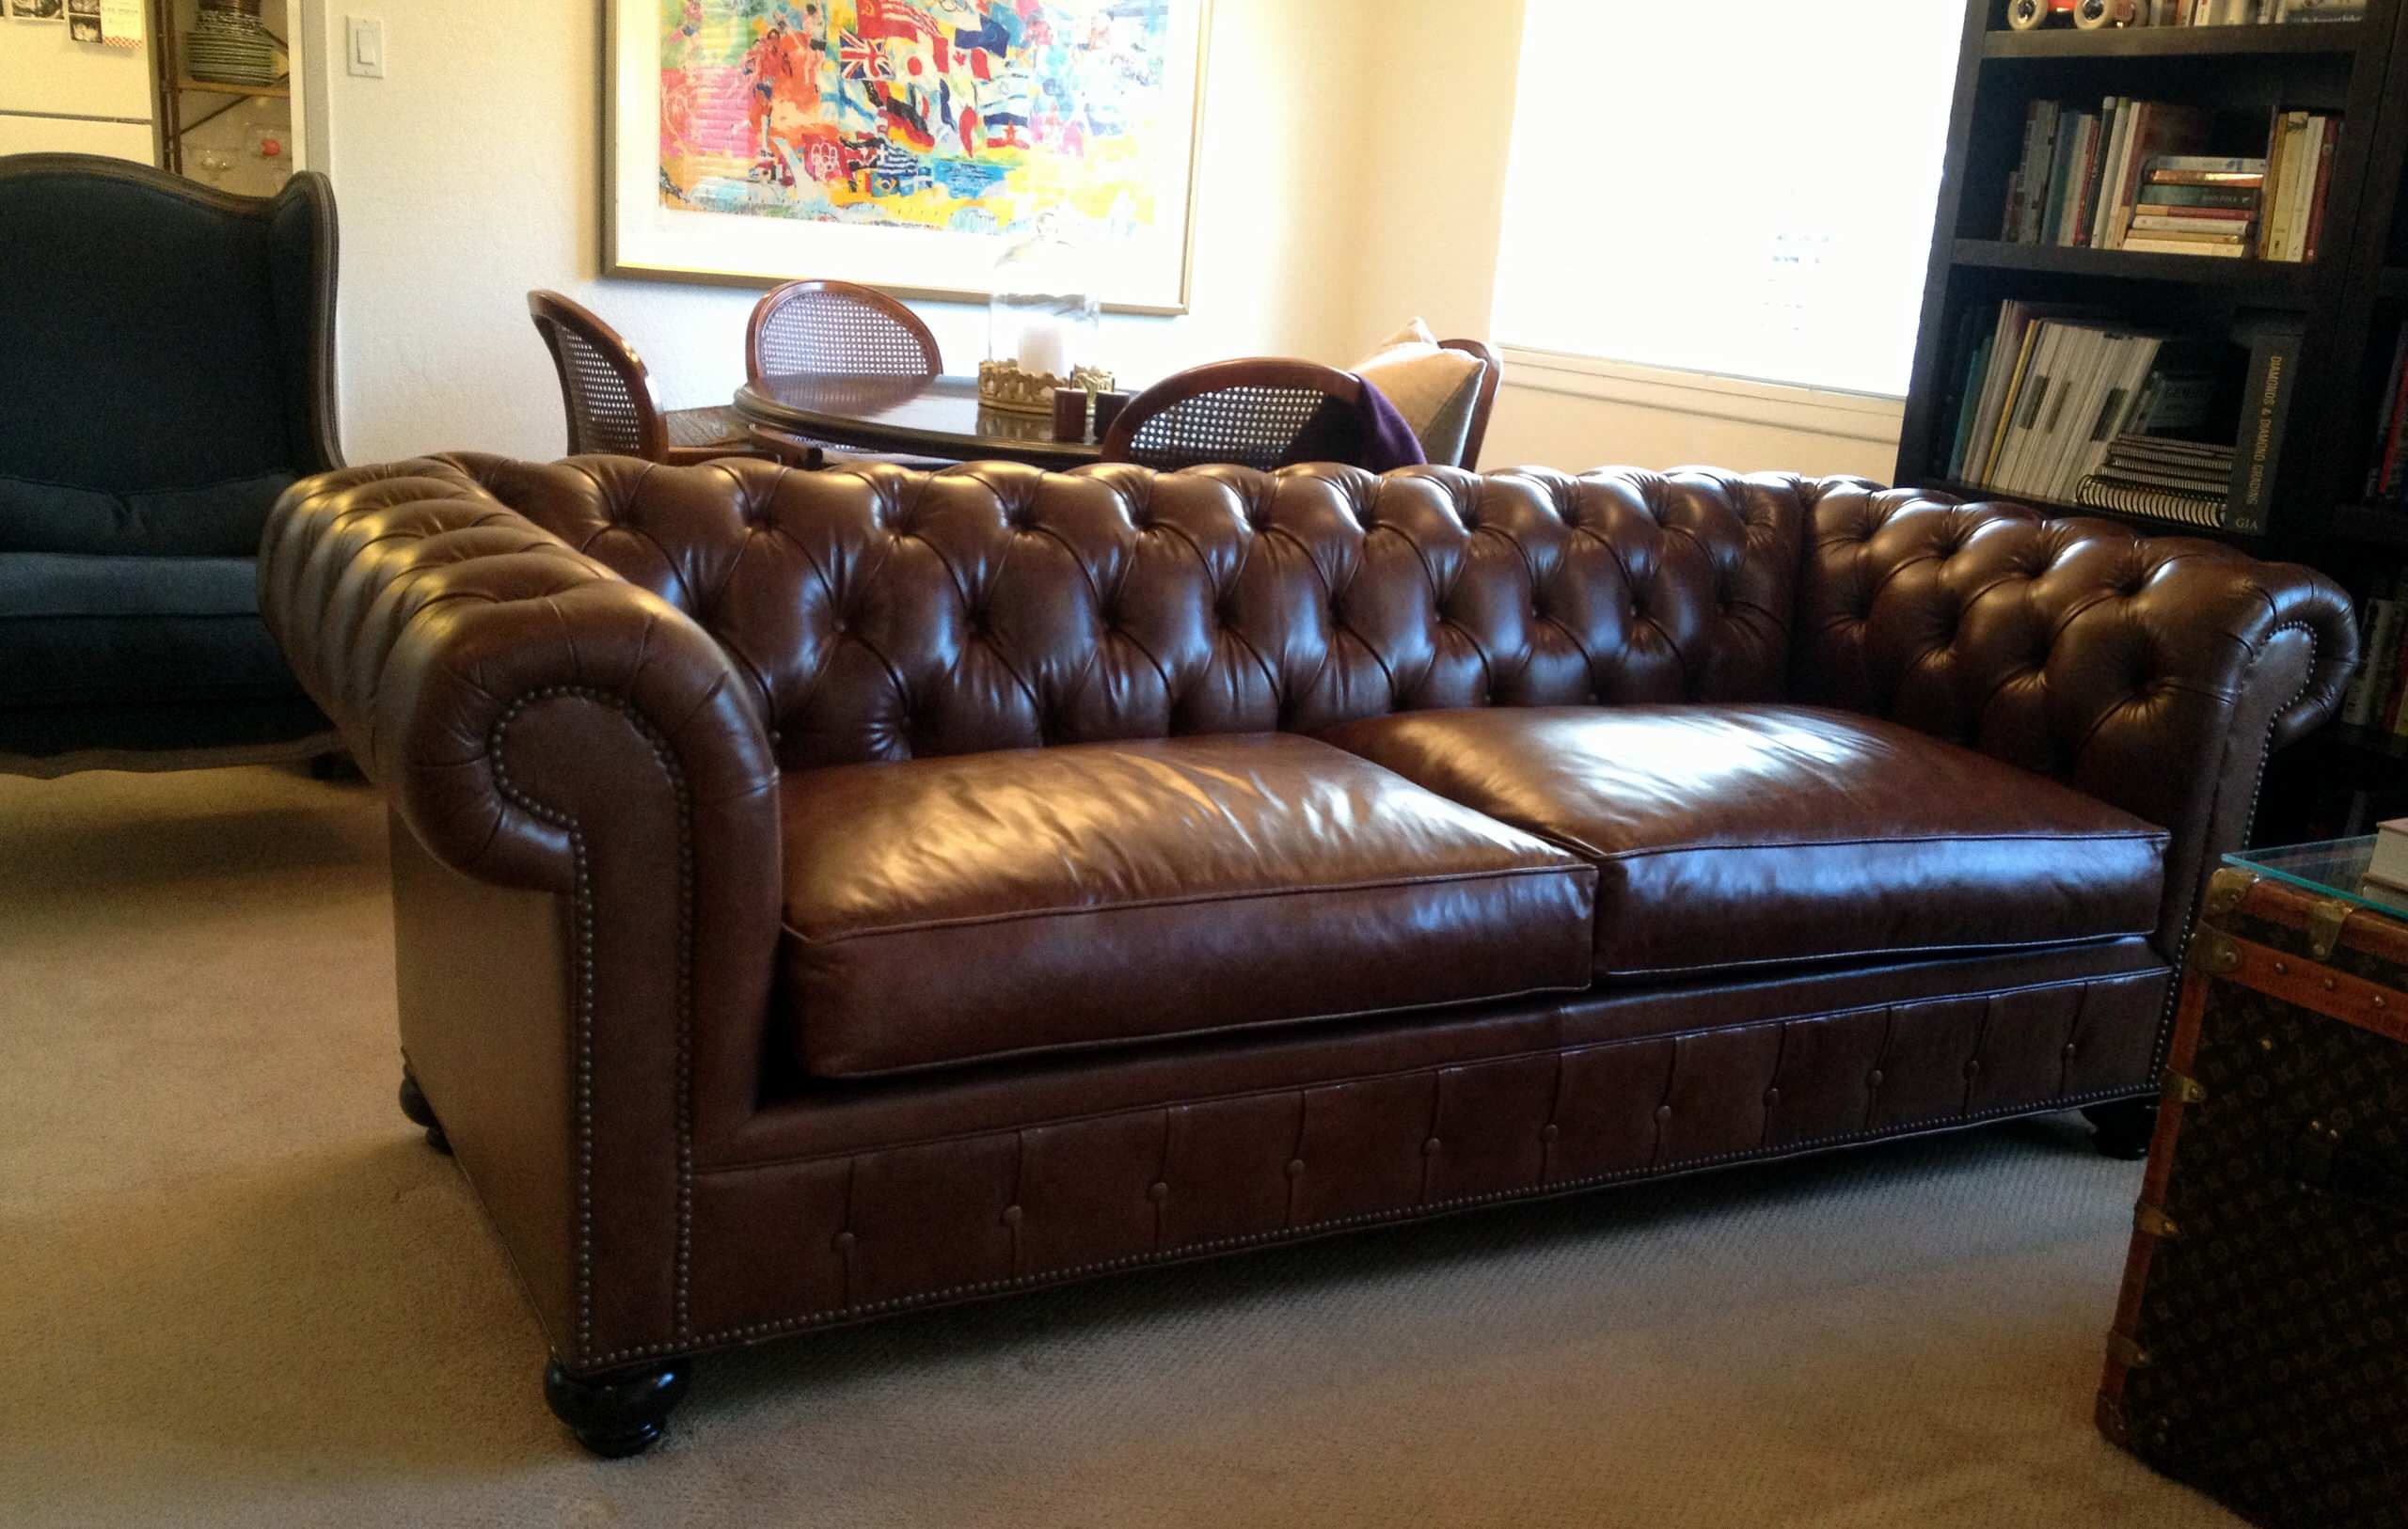 KENZIE STYLE - Chesterfield Custom Sectional Sofas - Traditional - Living  Room - Los Angeles - by Monarch Sofas | Houzz